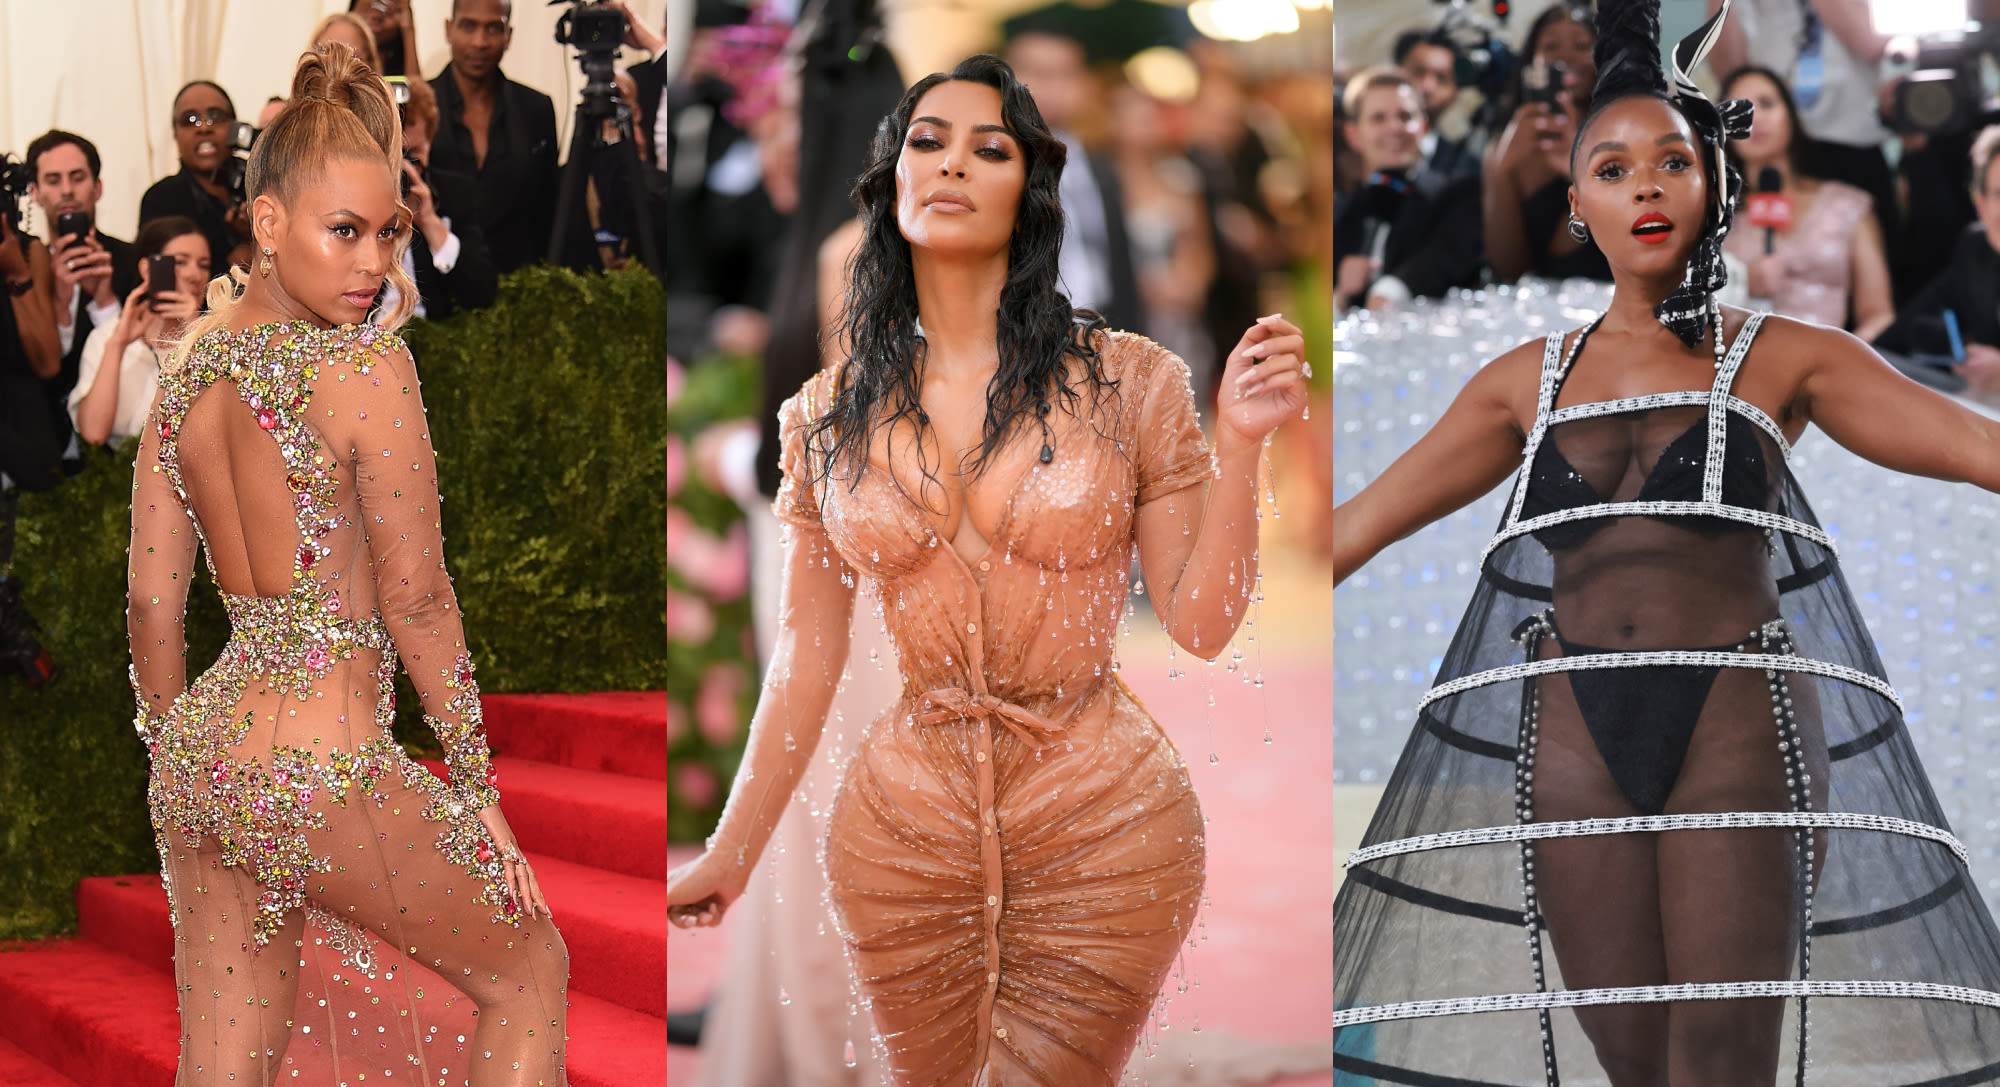 Met Gala’s Sheer Dresses Over the Years: Beyoncé in Givenchy’s See-through Look, Kim Kardashian Dripping in Mugler and More